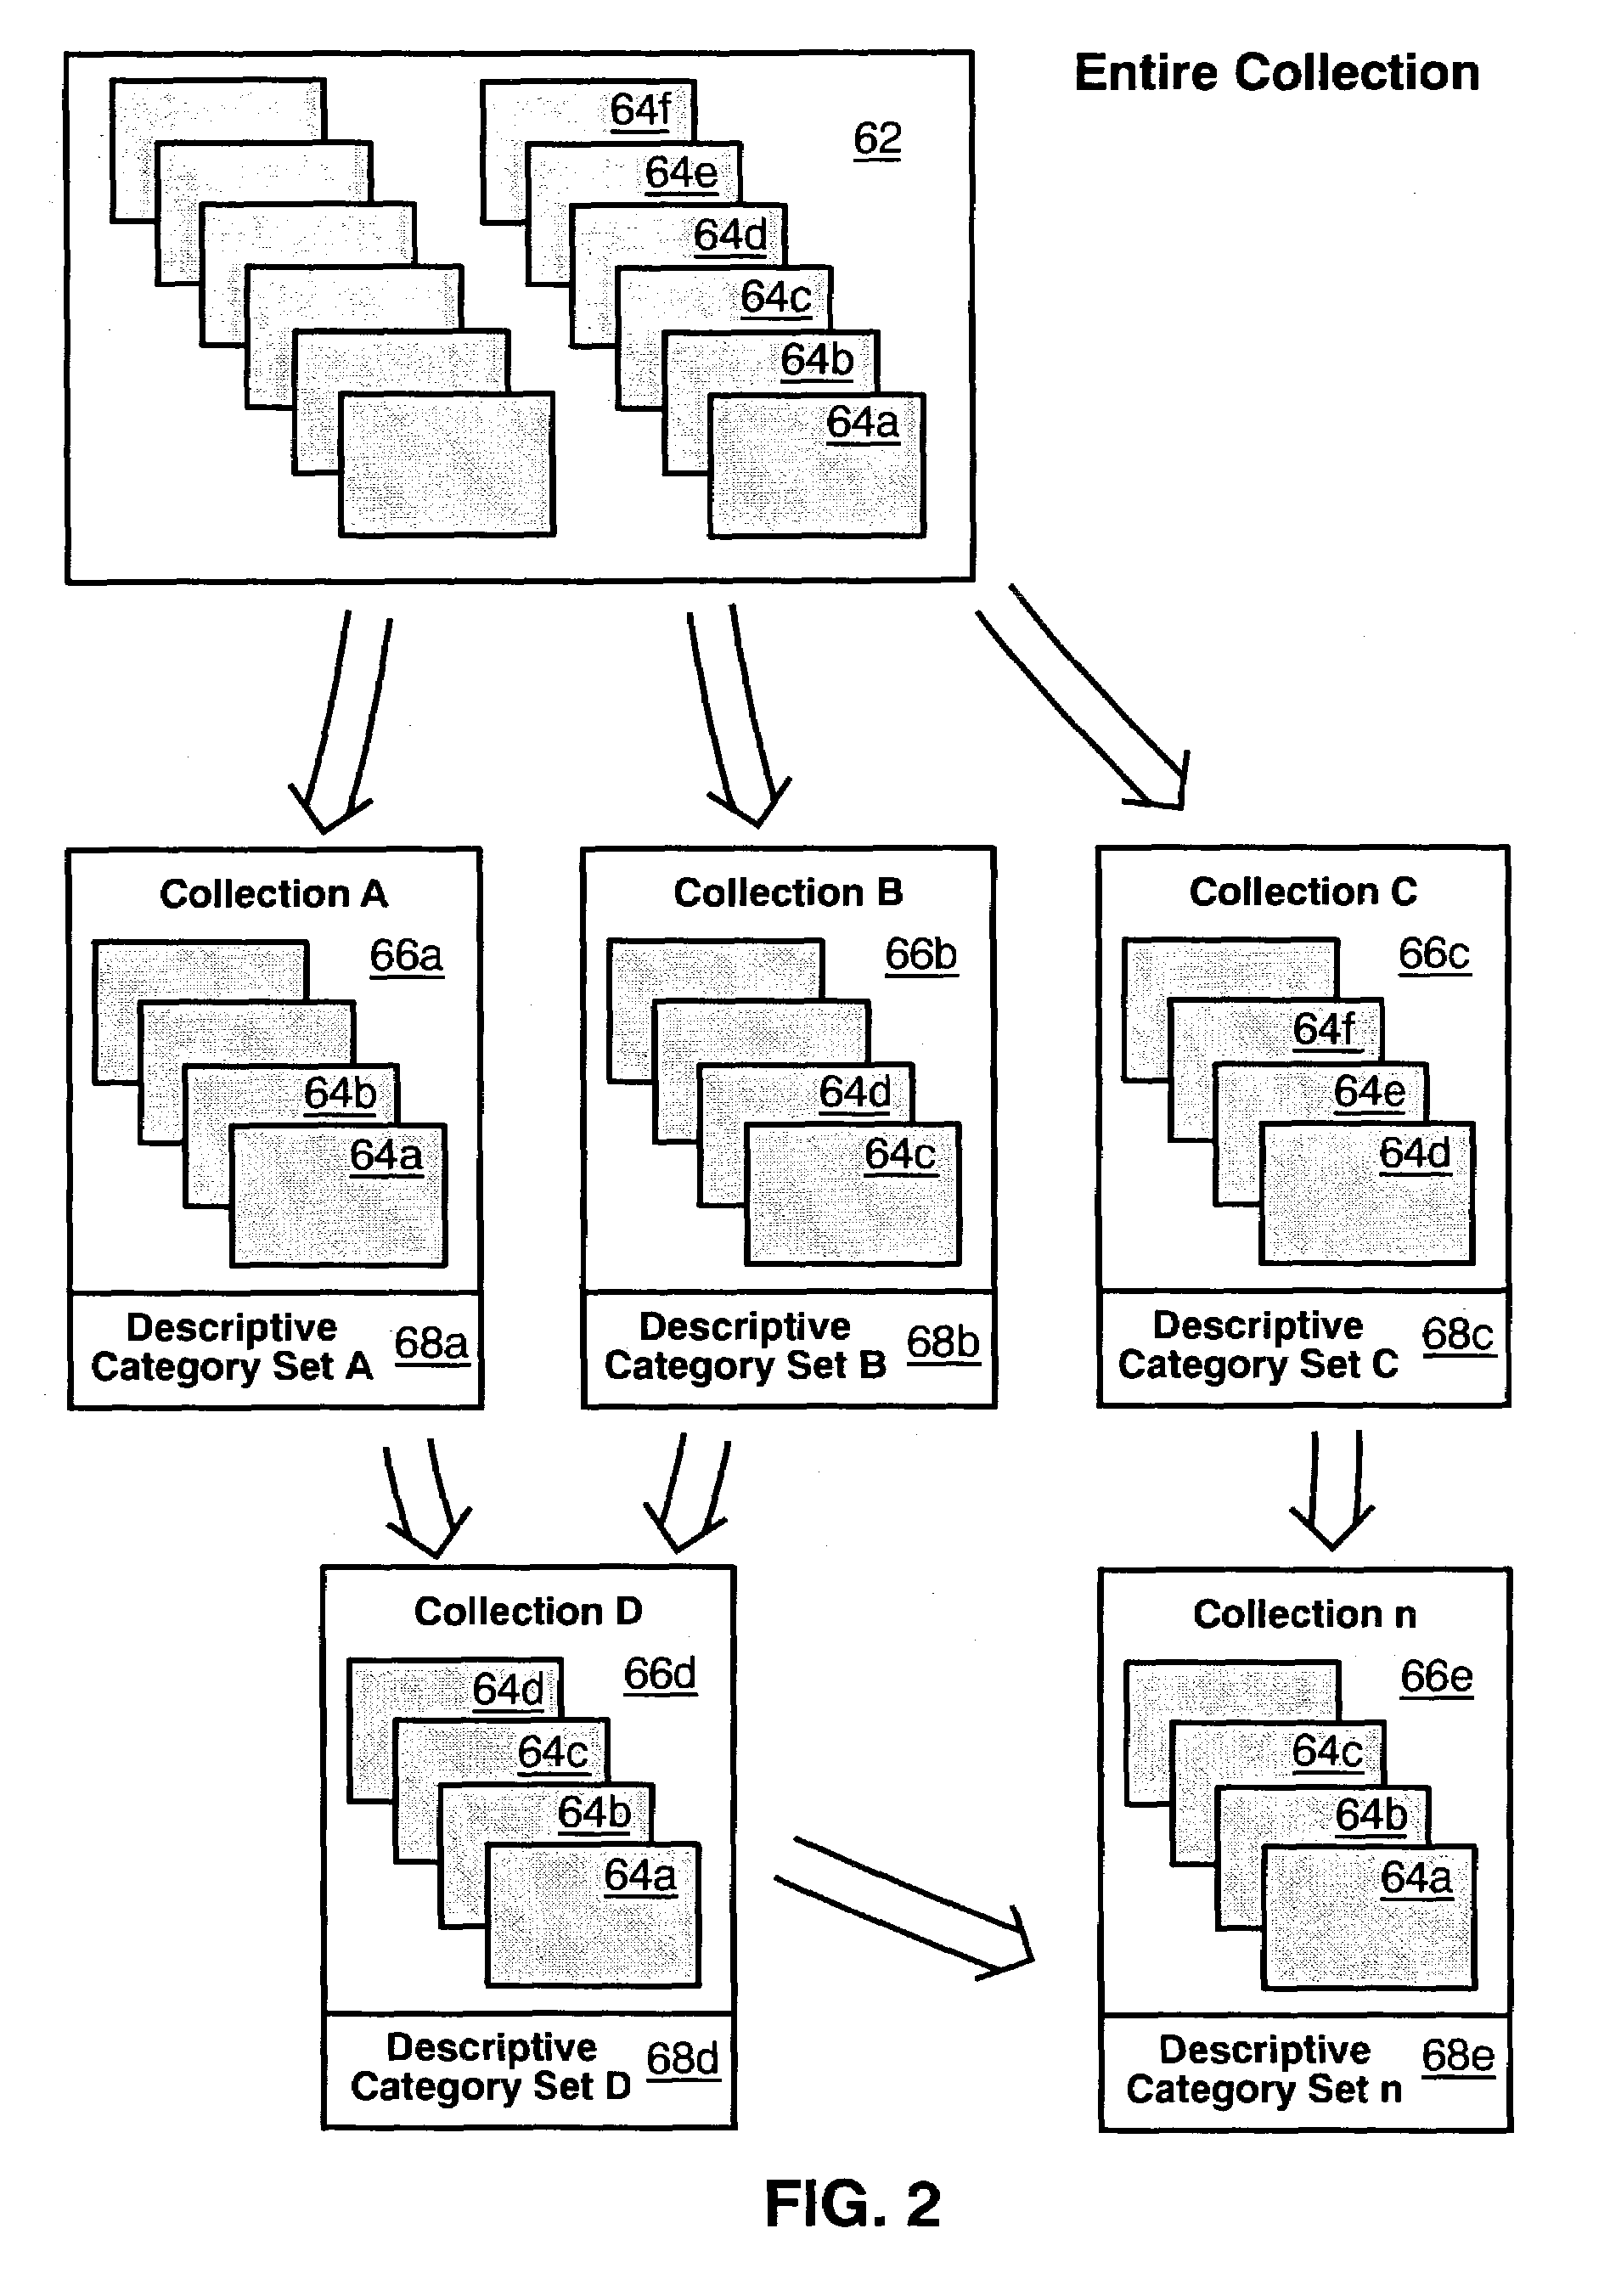 Collection management database of arbitrary schema